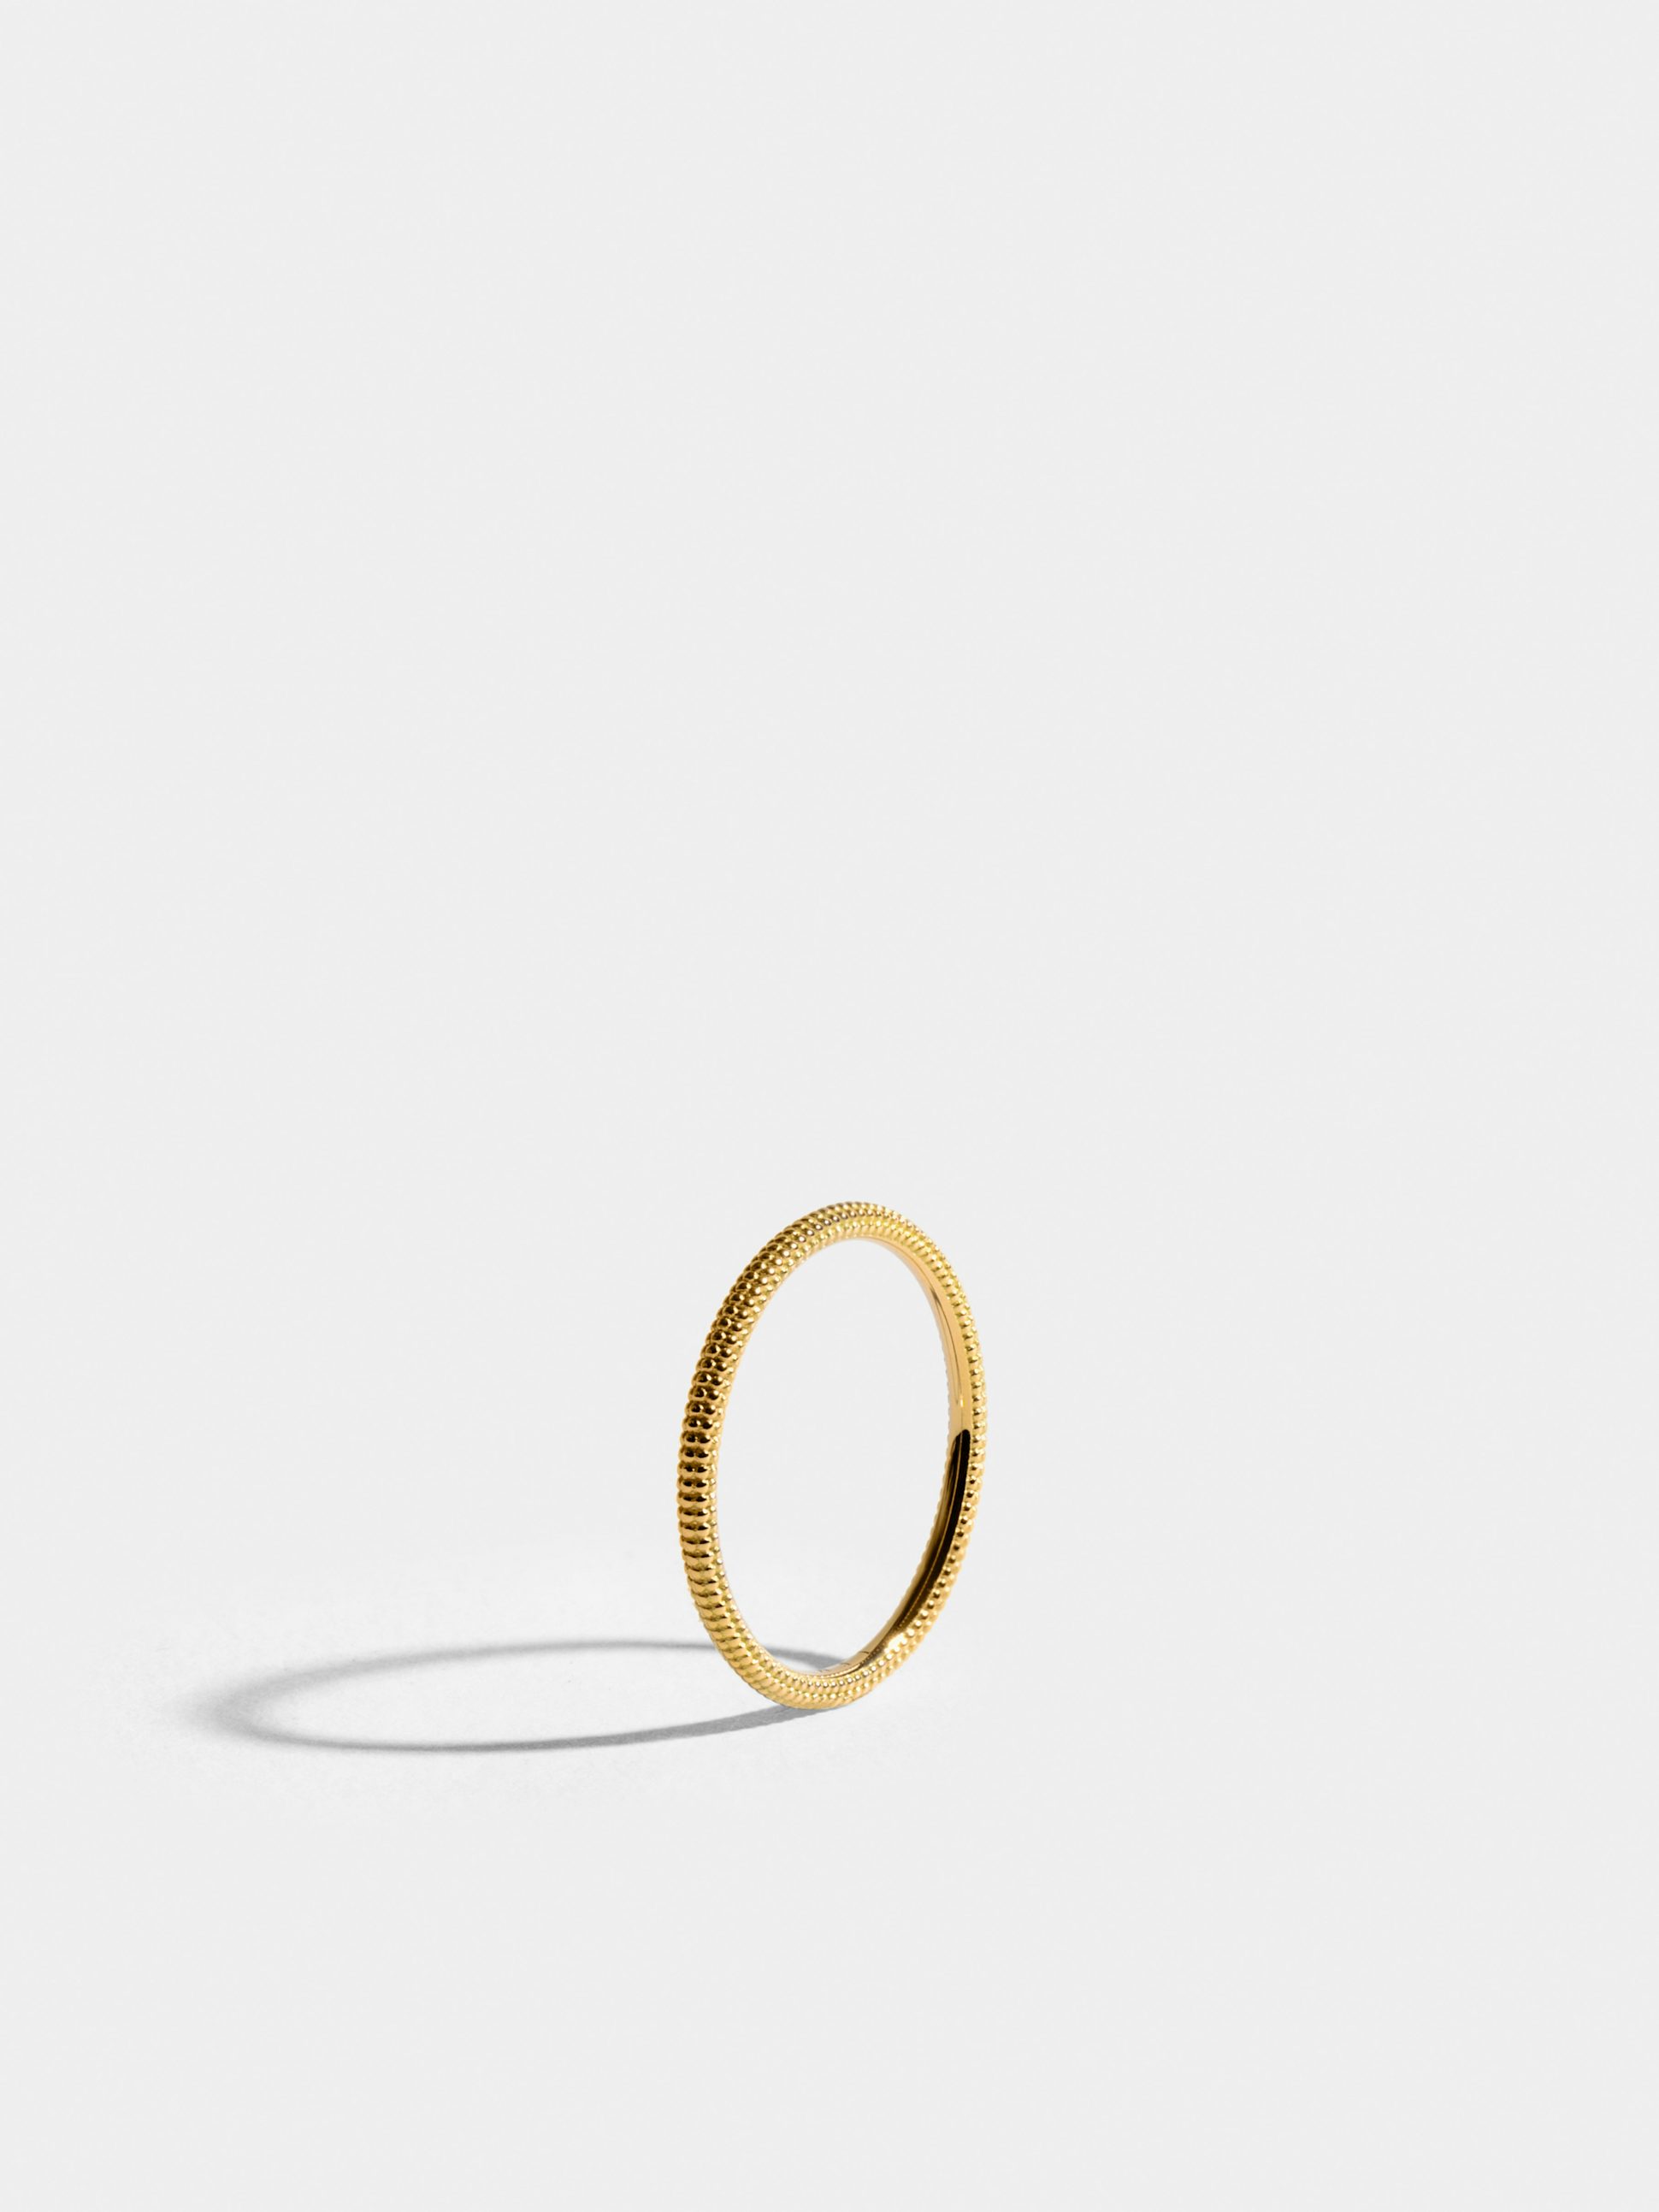 Anagramme "millegrains" ring in 18k Fairmined ethical yellow gold | JEM joaillerie éthique